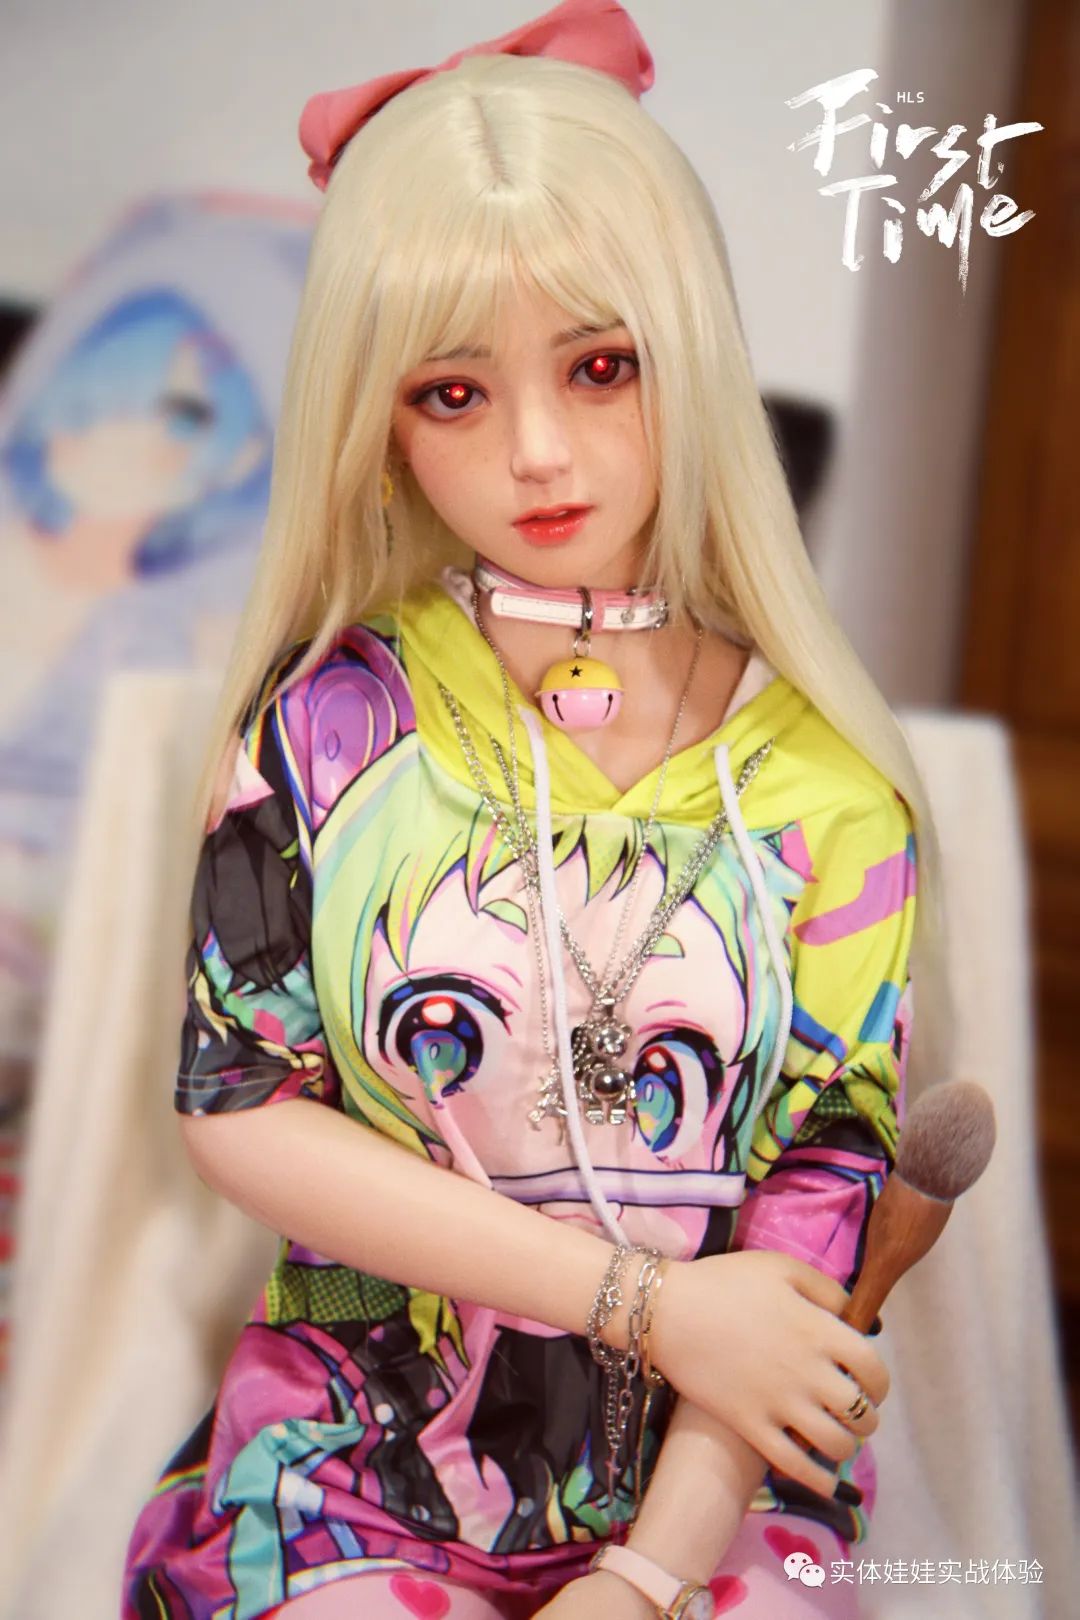 How to judge the quality of a physical doll product